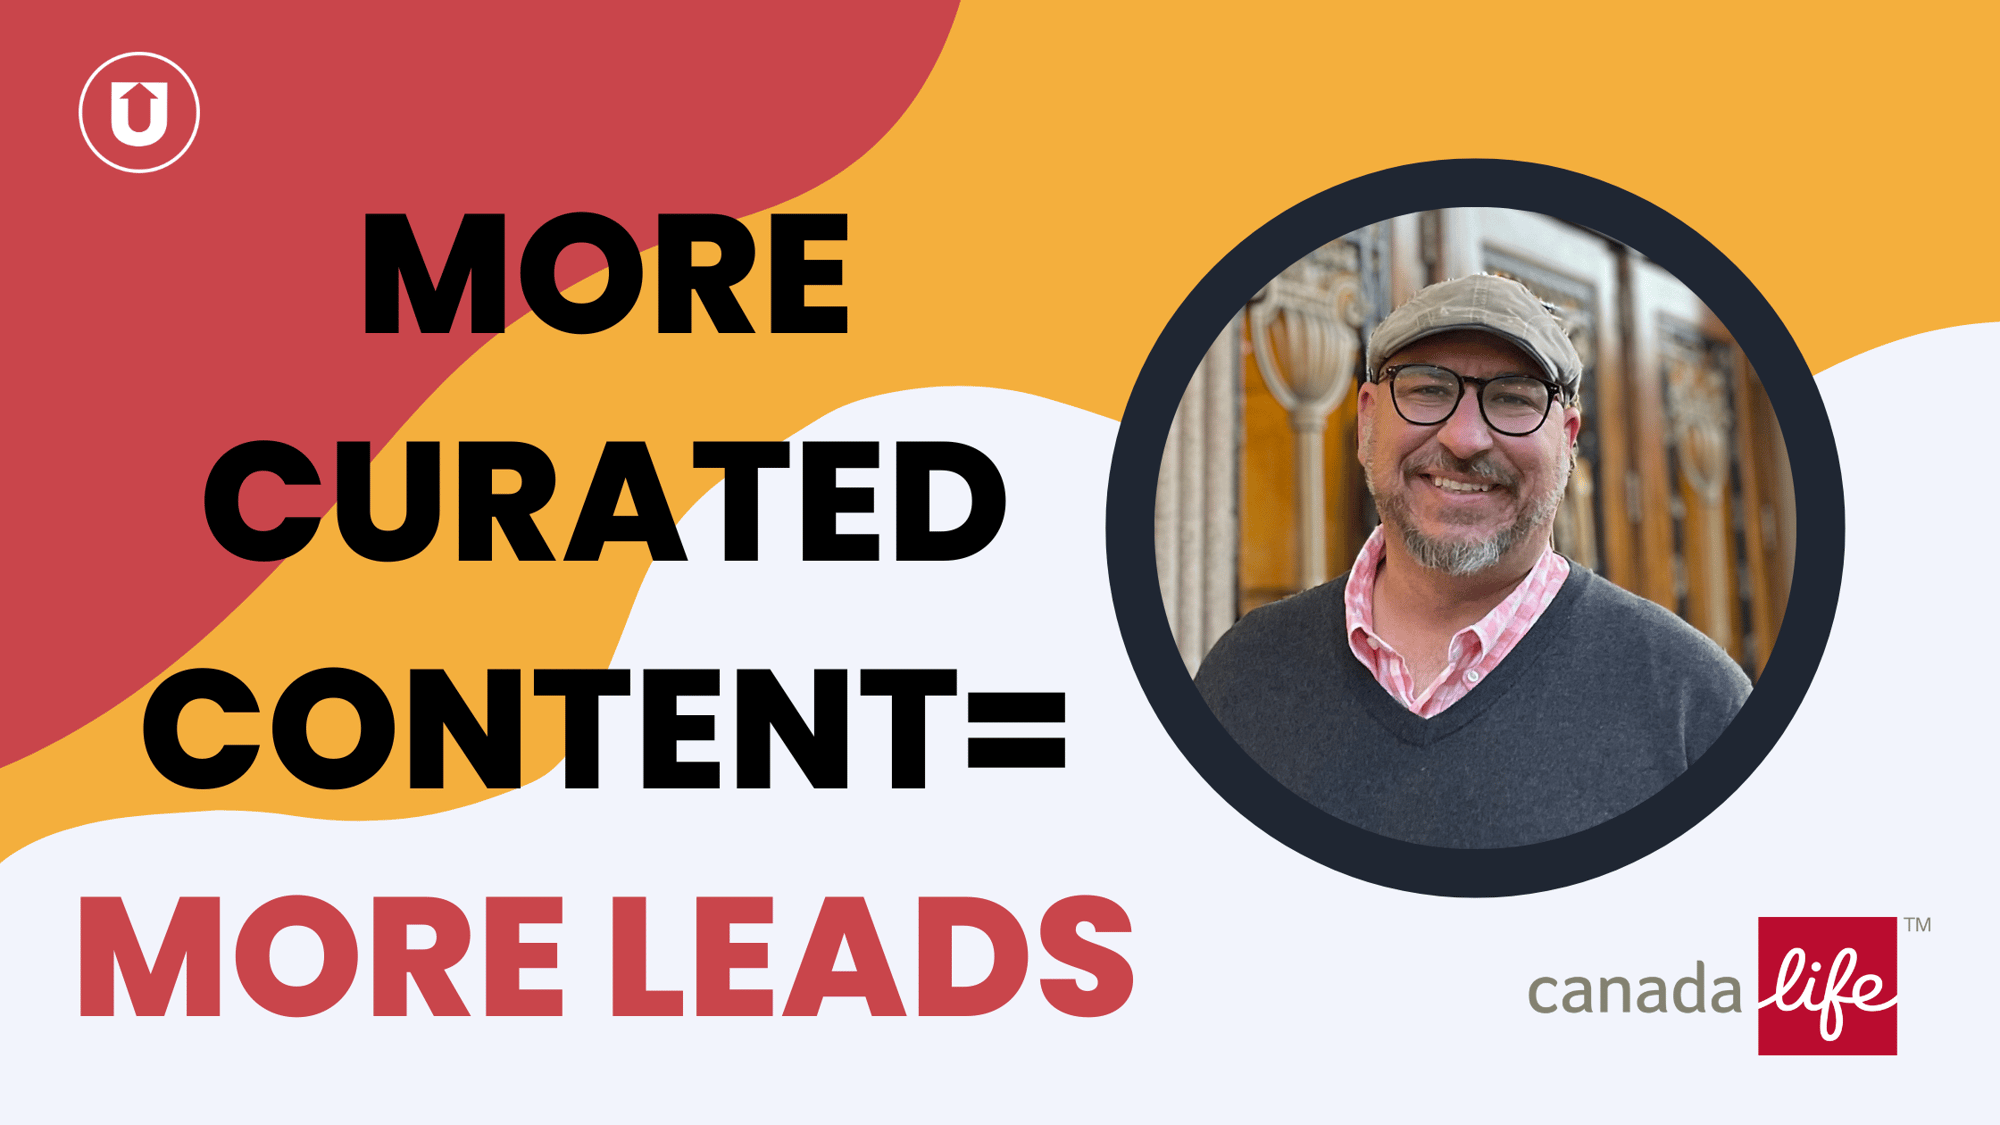 more curated content equals more leads